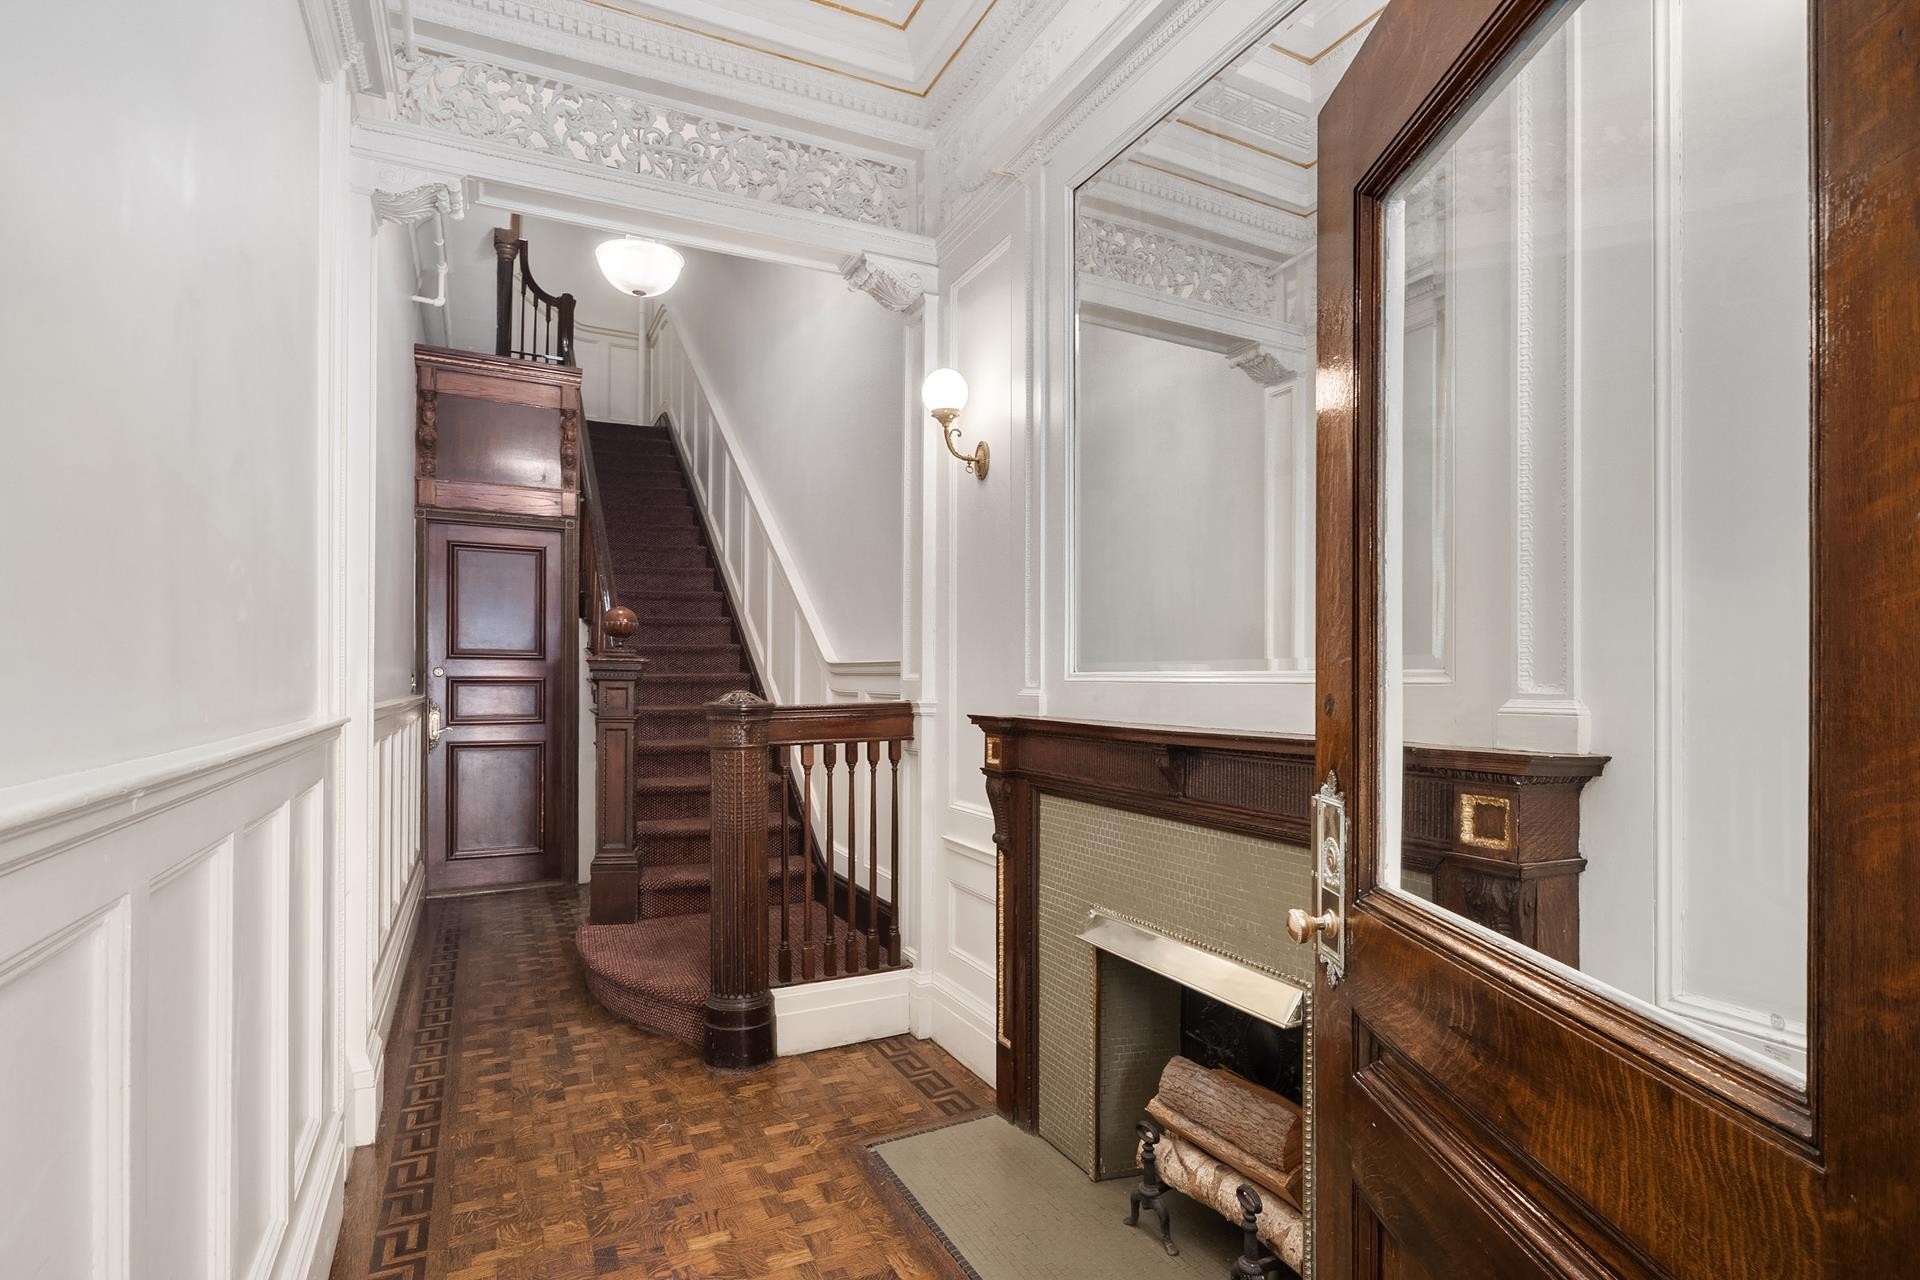 3. Single Family Townhouse for Sale at 11 E 76TH ST, TOWNHOUSE Lenox Hill, New York, New York 10021